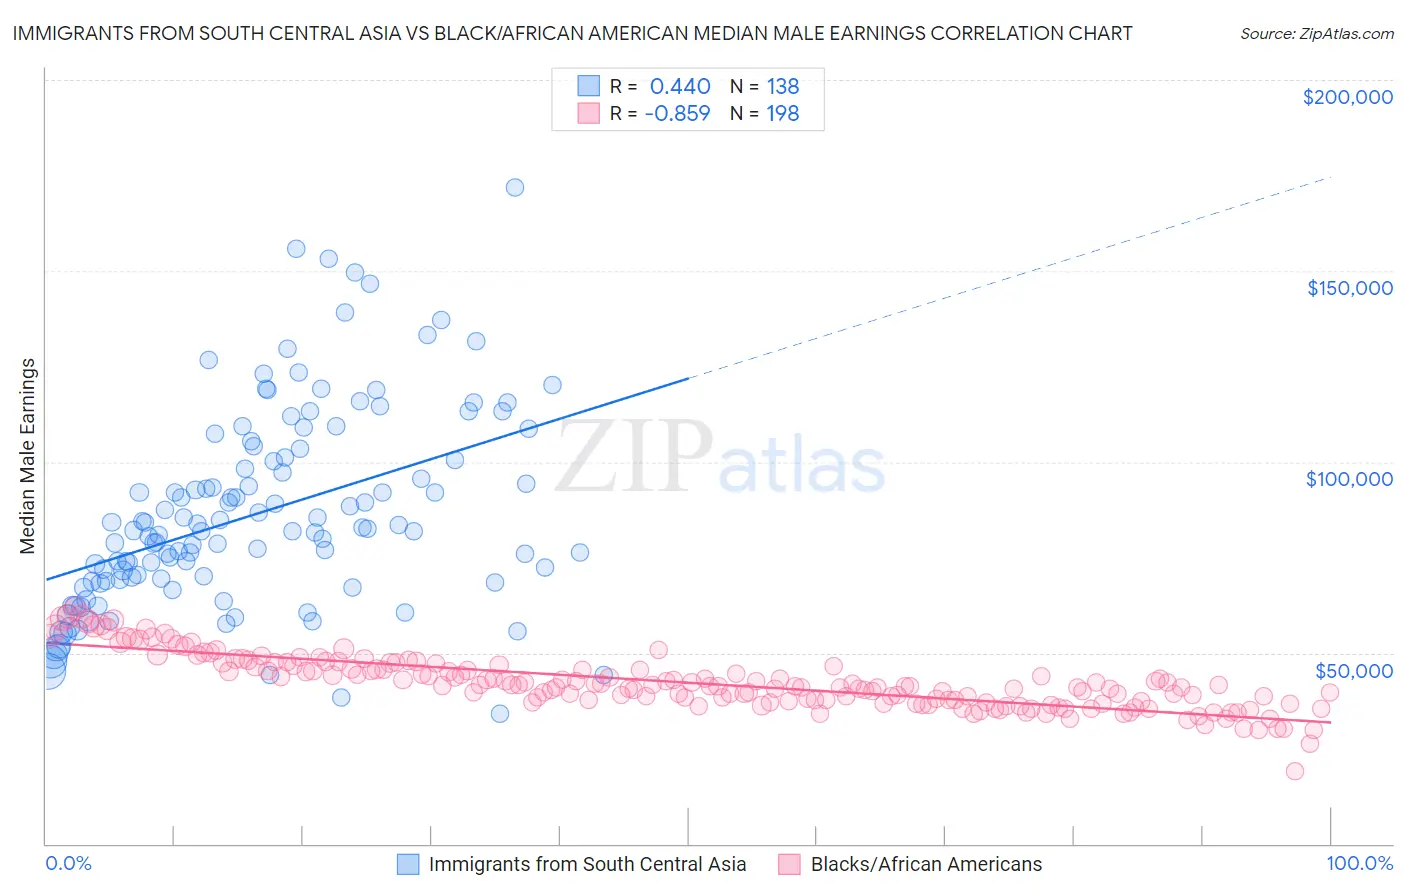 Immigrants from South Central Asia vs Black/African American Median Male Earnings